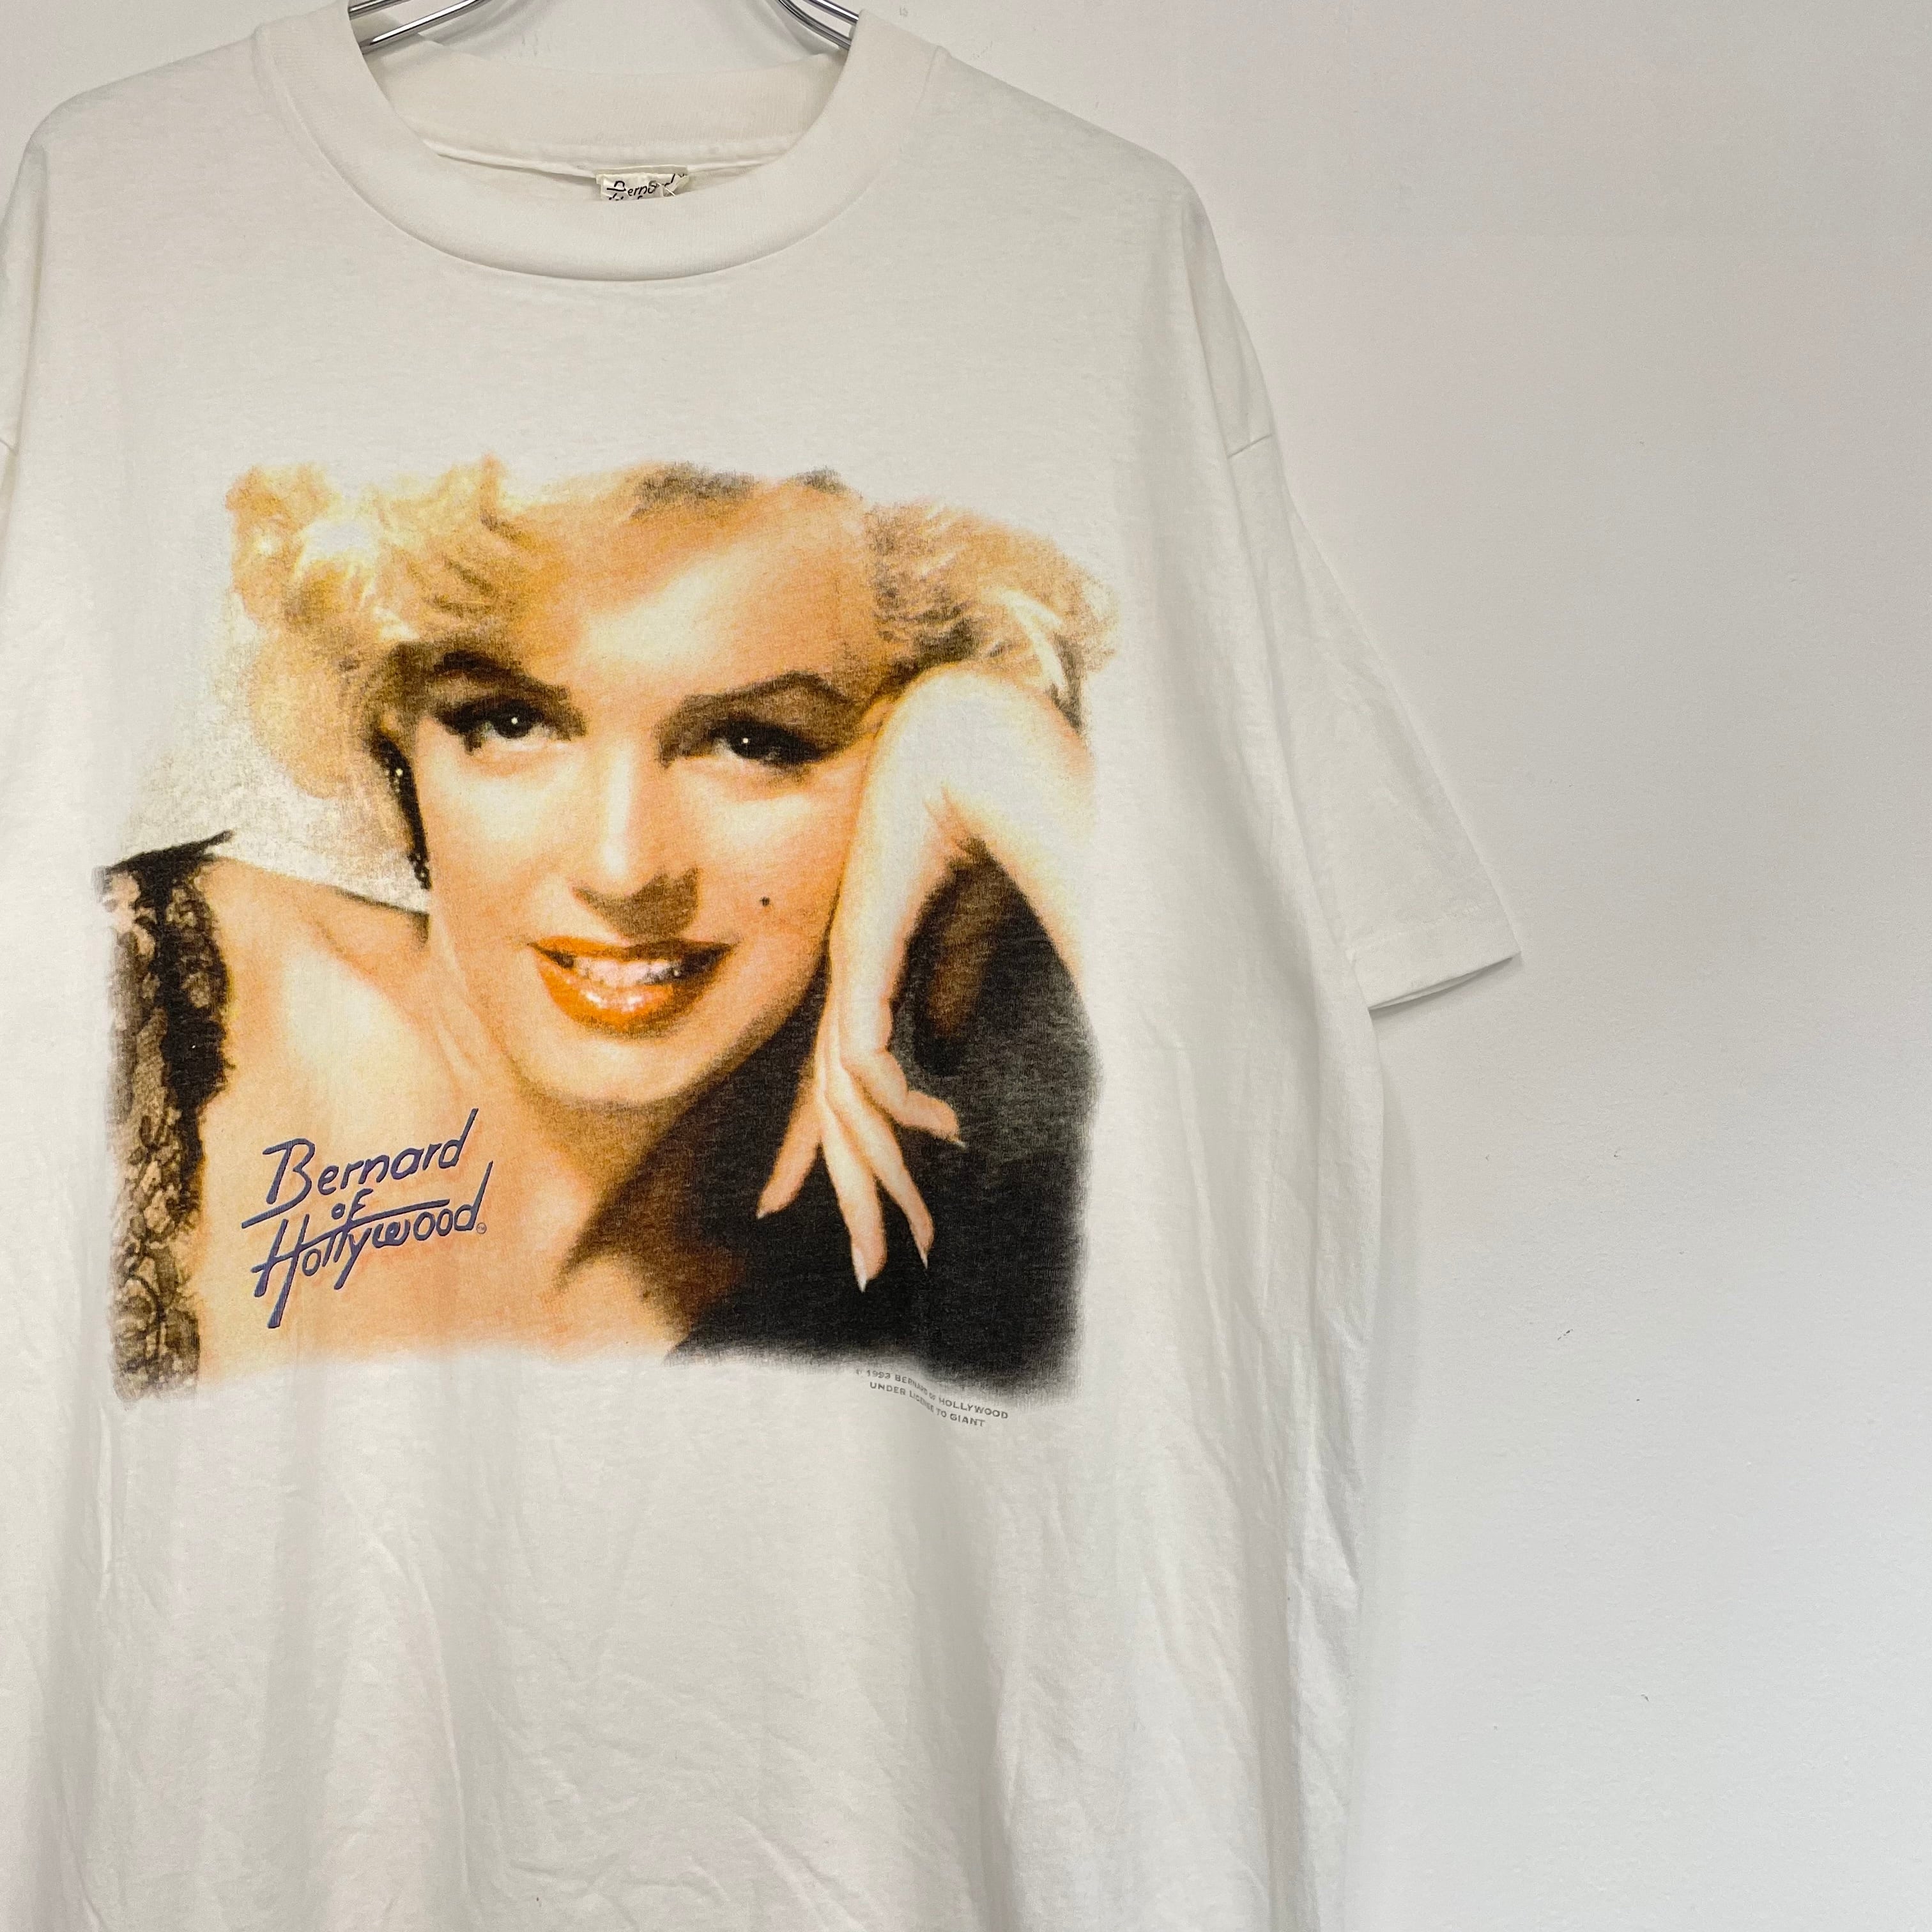 93s BERNARD OF HOLLYWOOD "マリリンモンロー" used s/s tee SIZE:XL